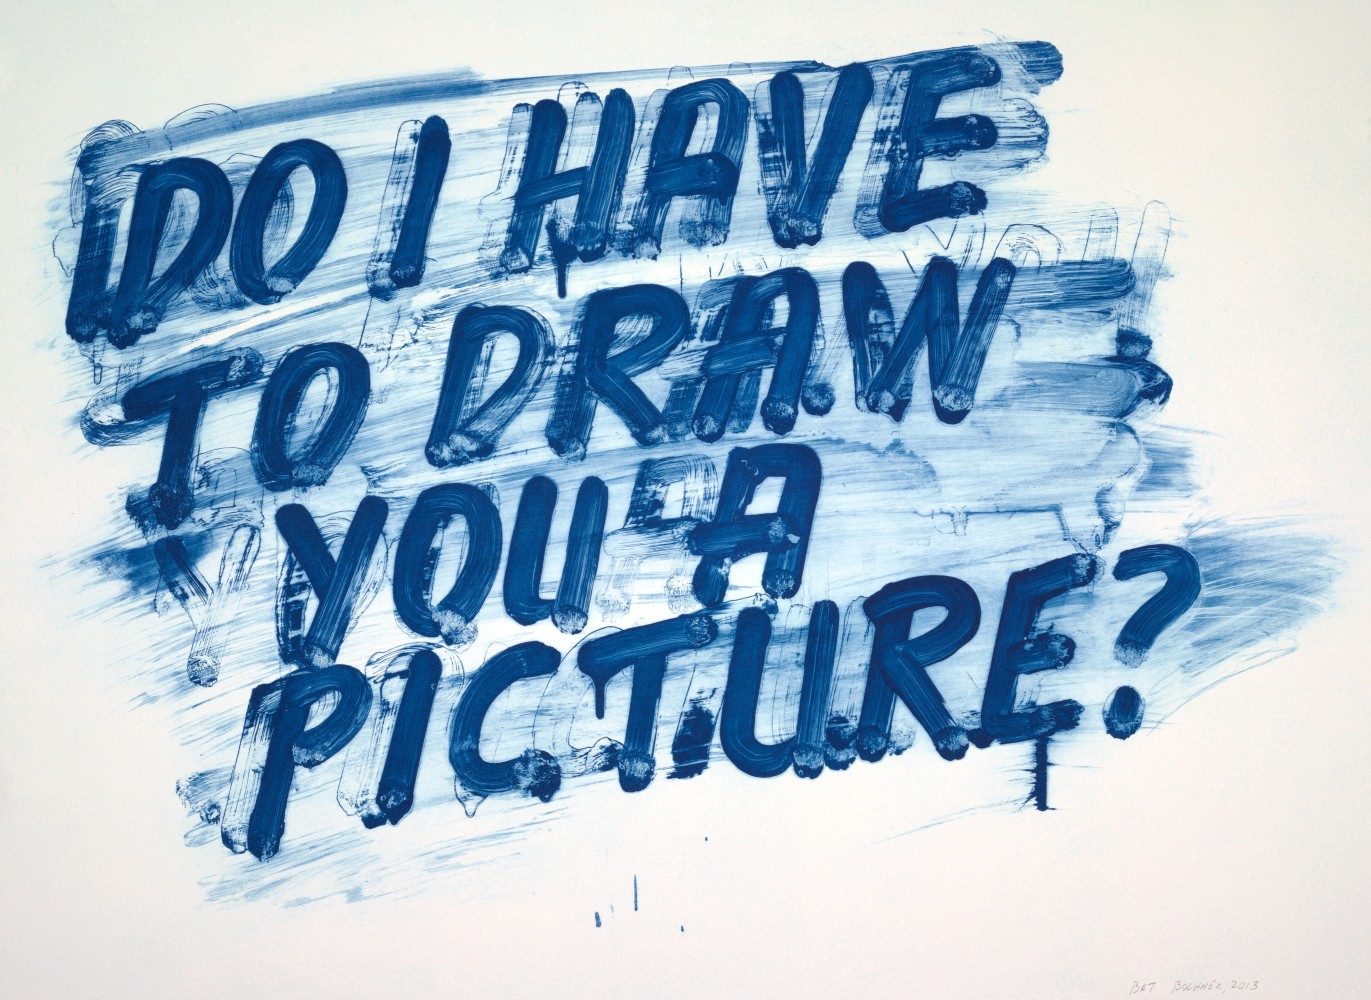 Do I Have Two Draw You A Picture?,&amp;nbsp;2013
Etching with aquatint
22 x 30 inches
Edition of 20